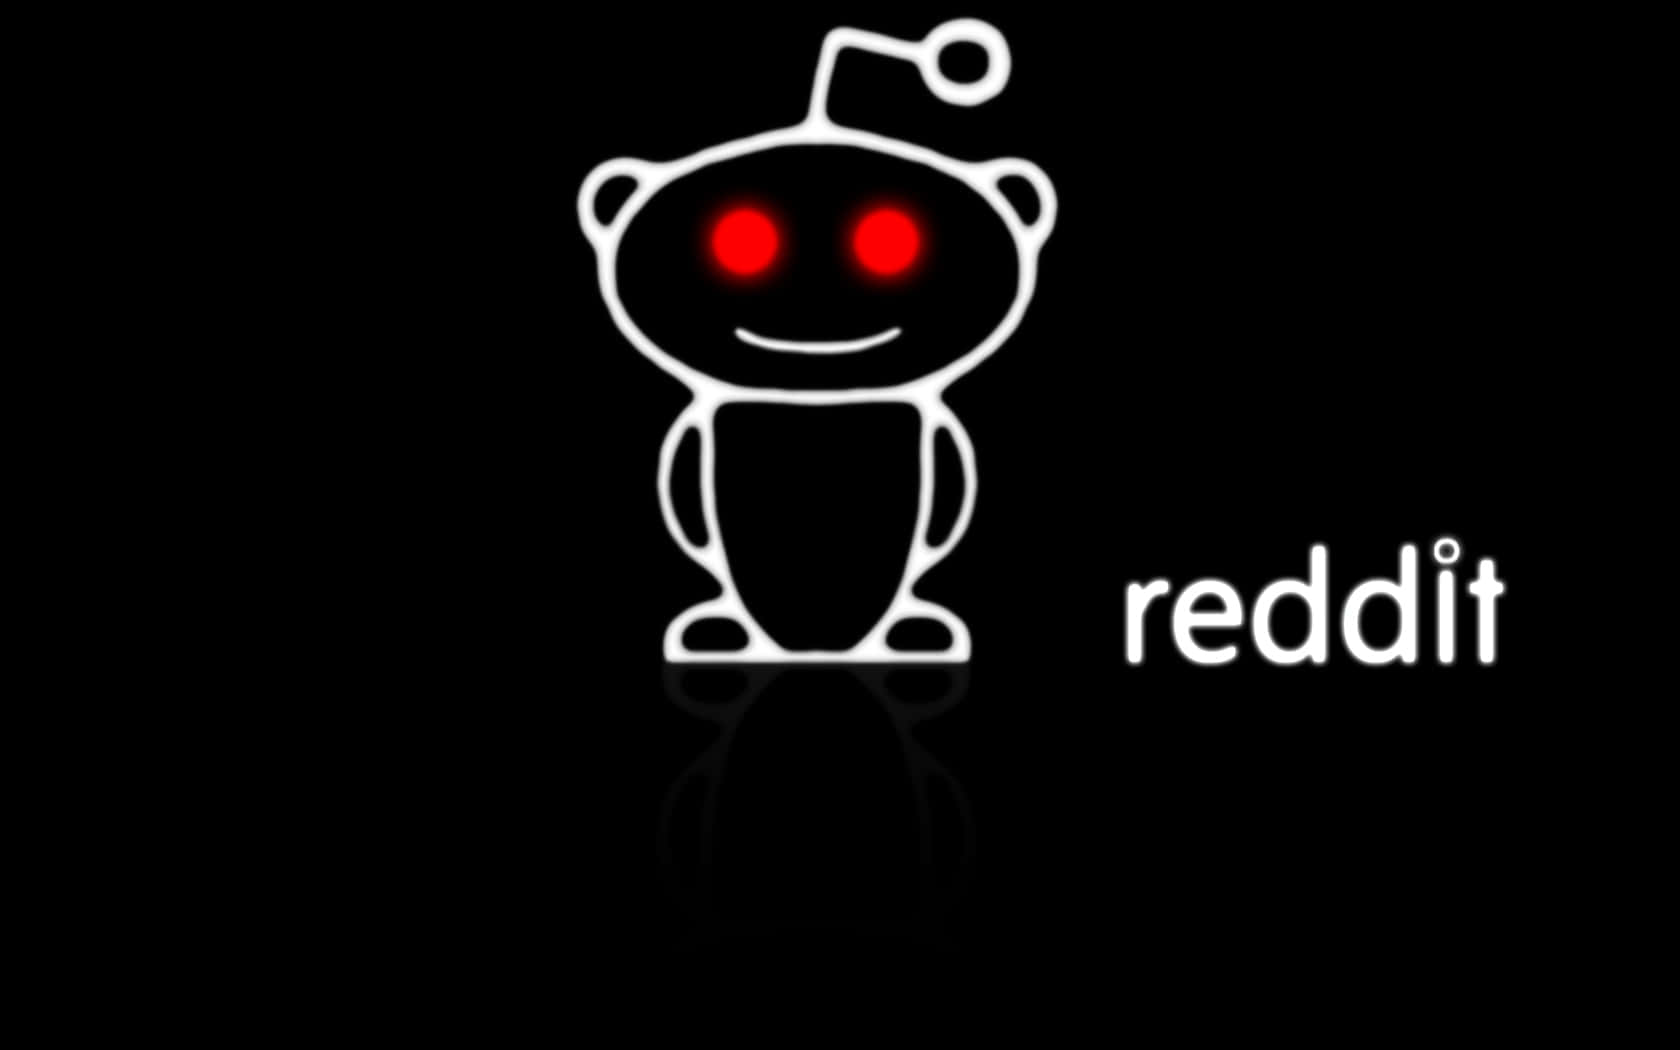 Stay up to date on the latest news on Reddit